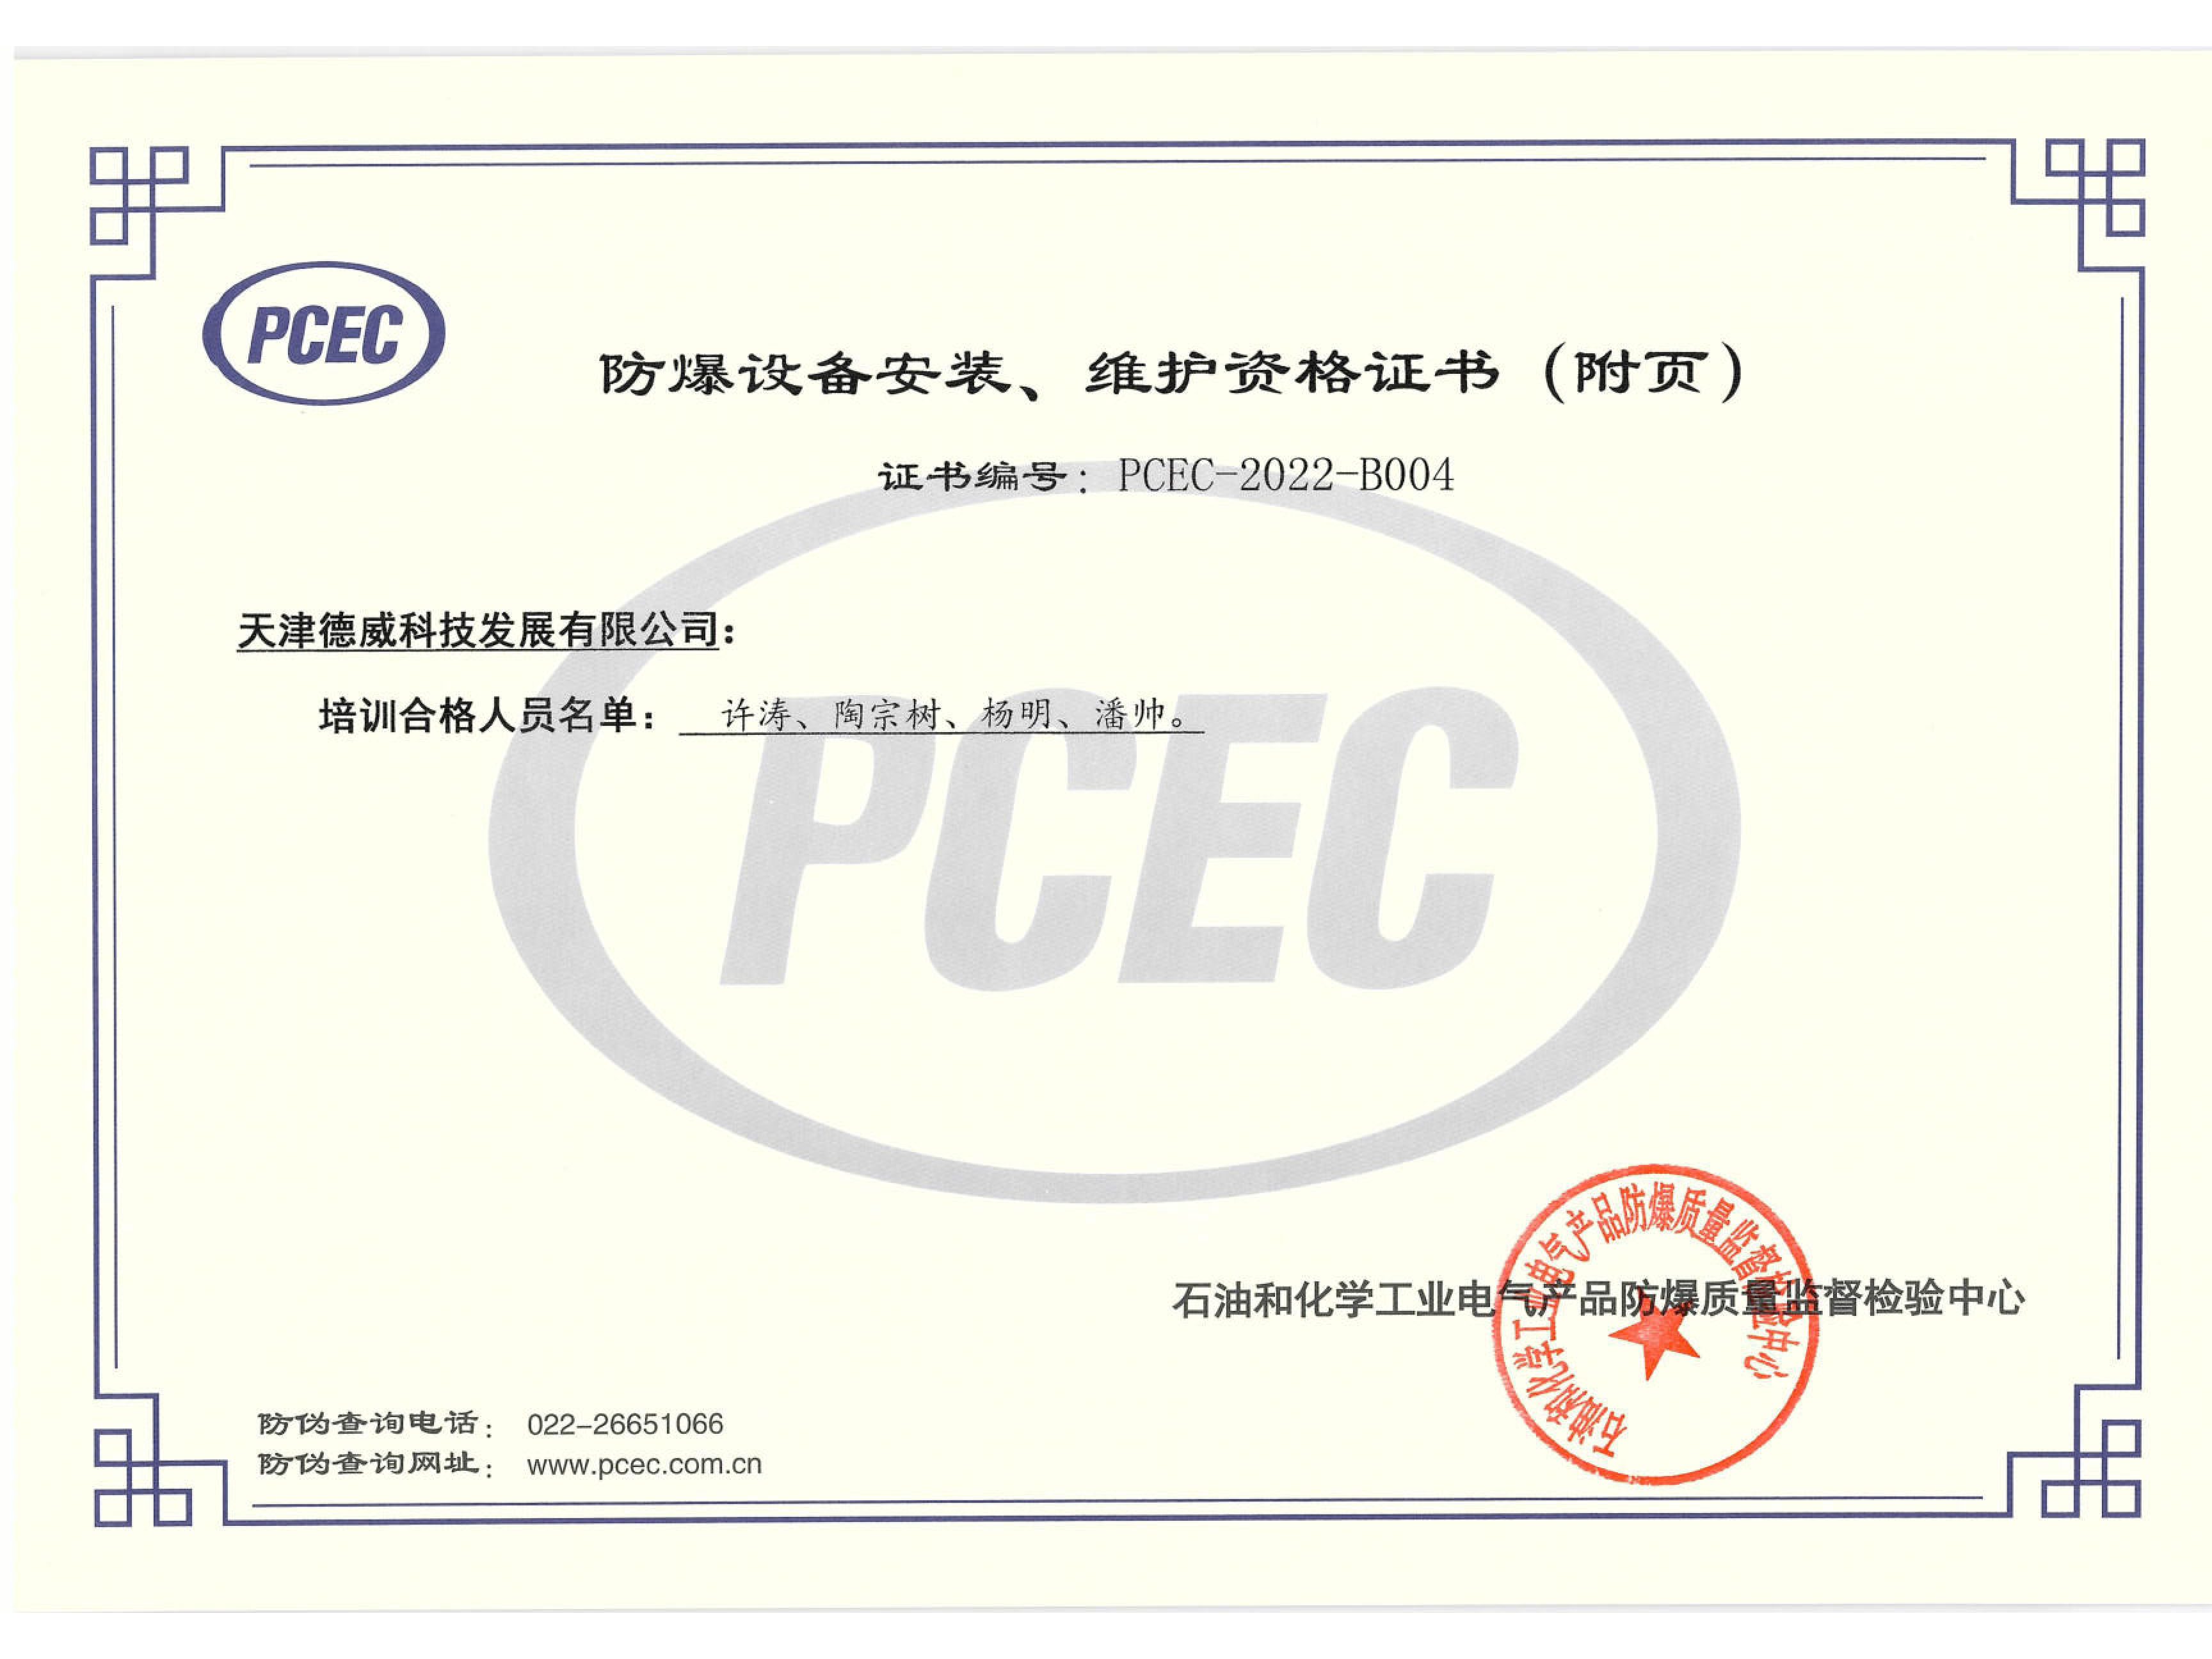 Explosion-proof equipment installation and maintenance qualification certificate (company)